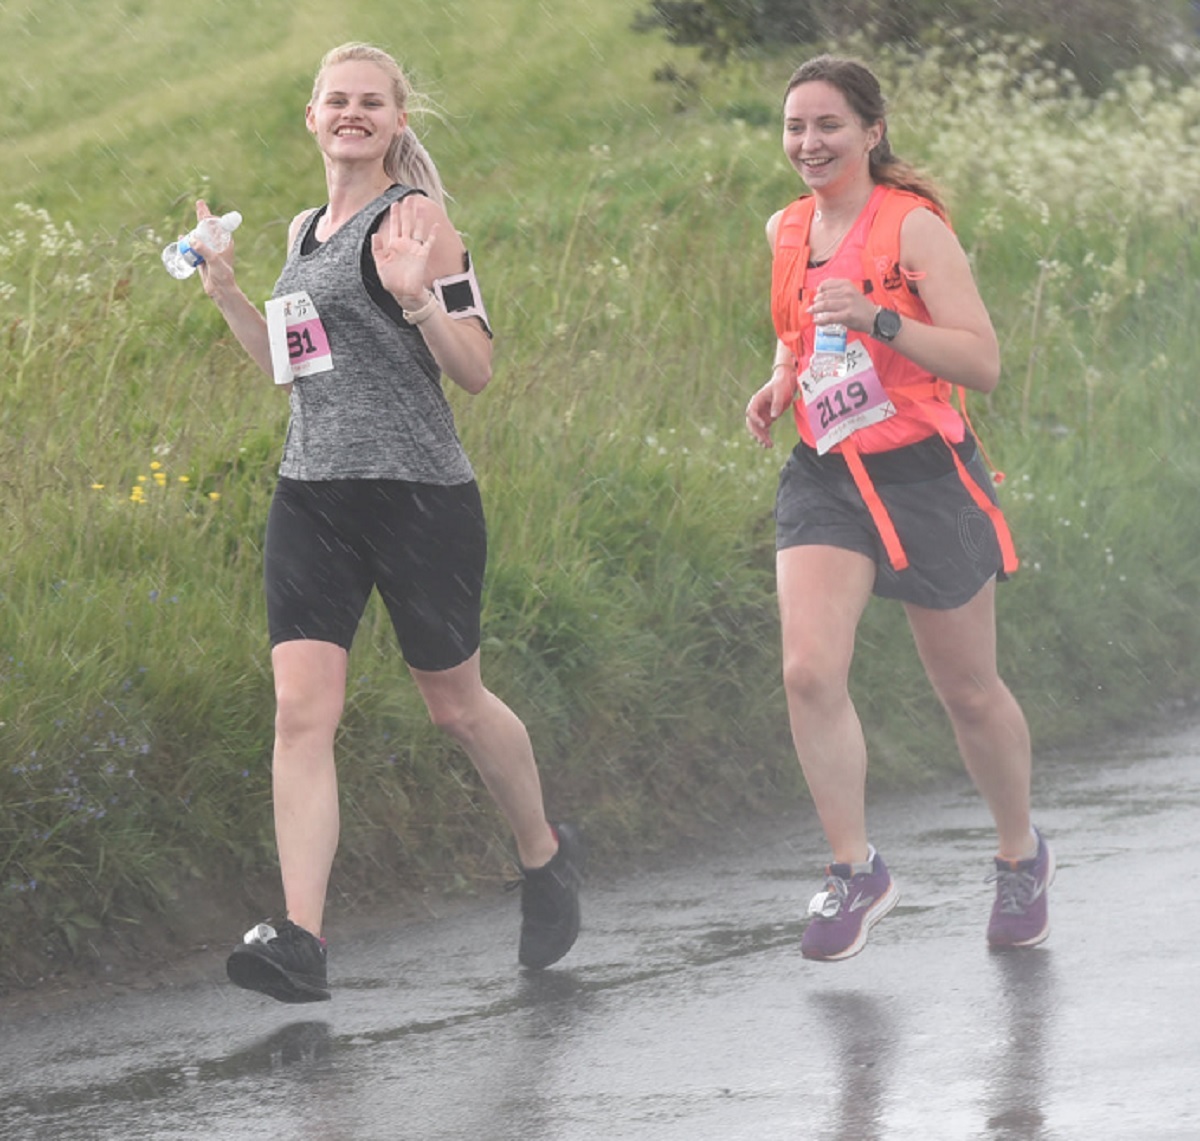 Big smiles - these runners embrace the challenge